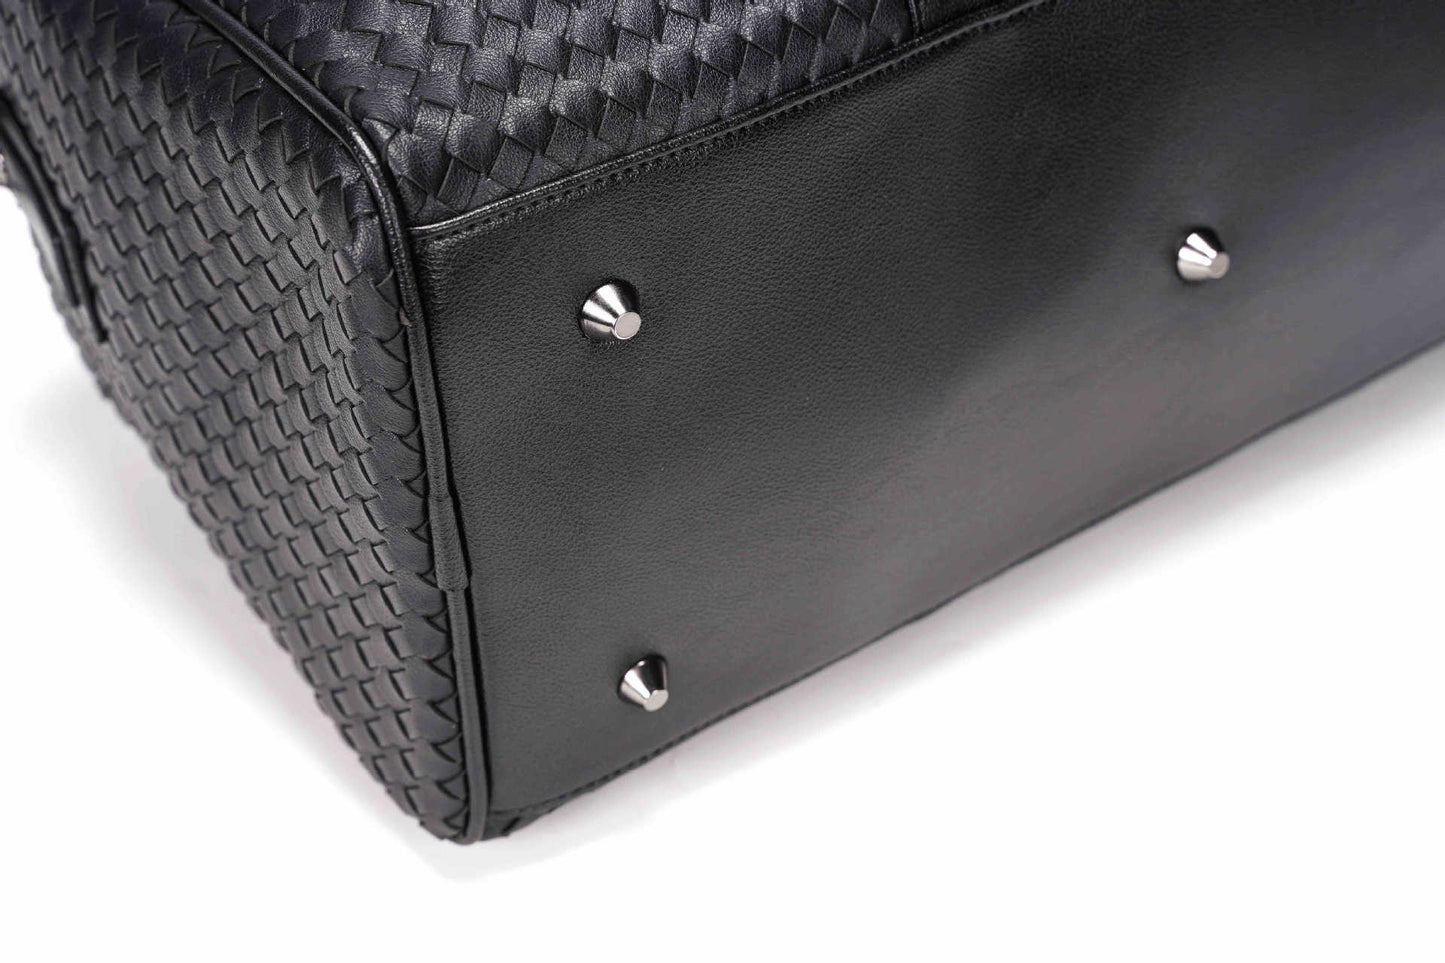 Travel bag in woven leather, large capacity man / woman. Very versatile to use on any occasion.